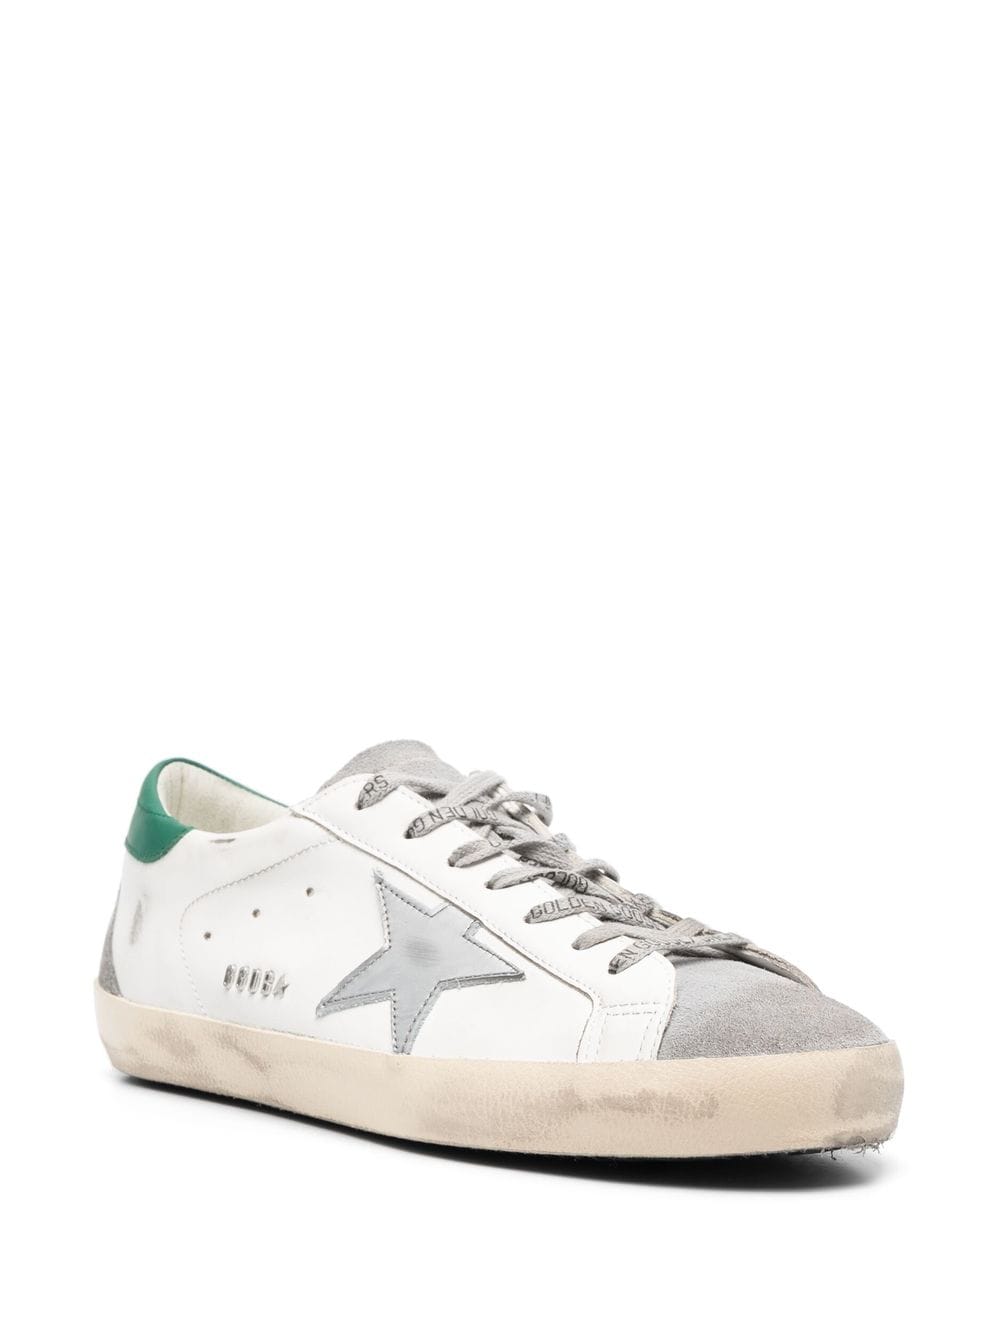 Golden Goose Super-star Leather Upper And Heel Suede Star And Spur